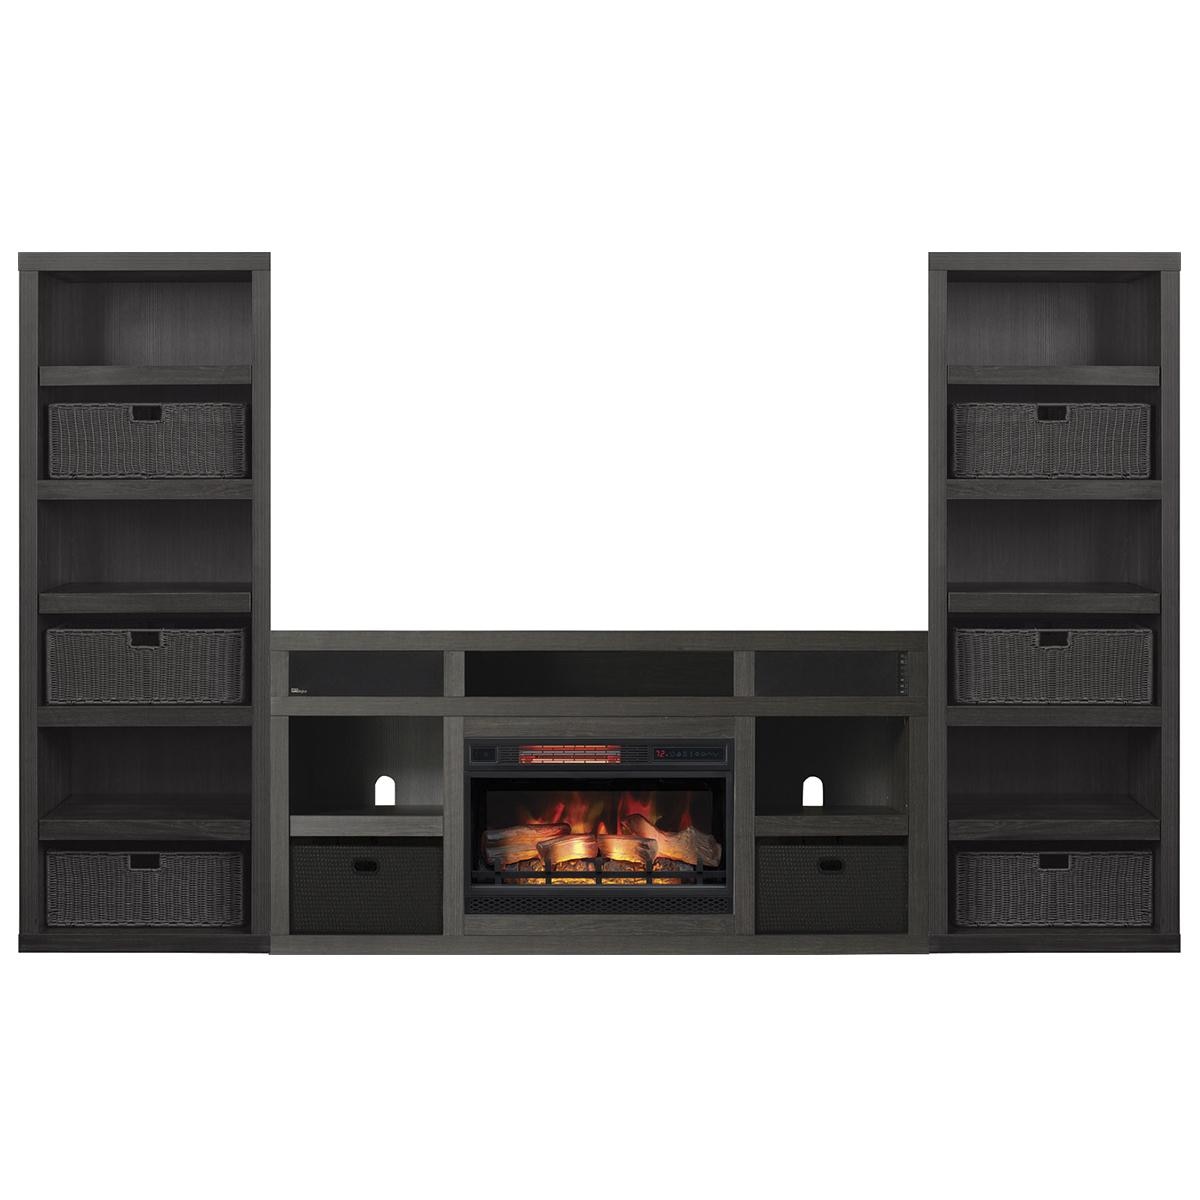 80 Inch Tv Stand with Fireplace Awesome Fabio Flames Greatlin 3 Piece Fireplace Entertainment Wall